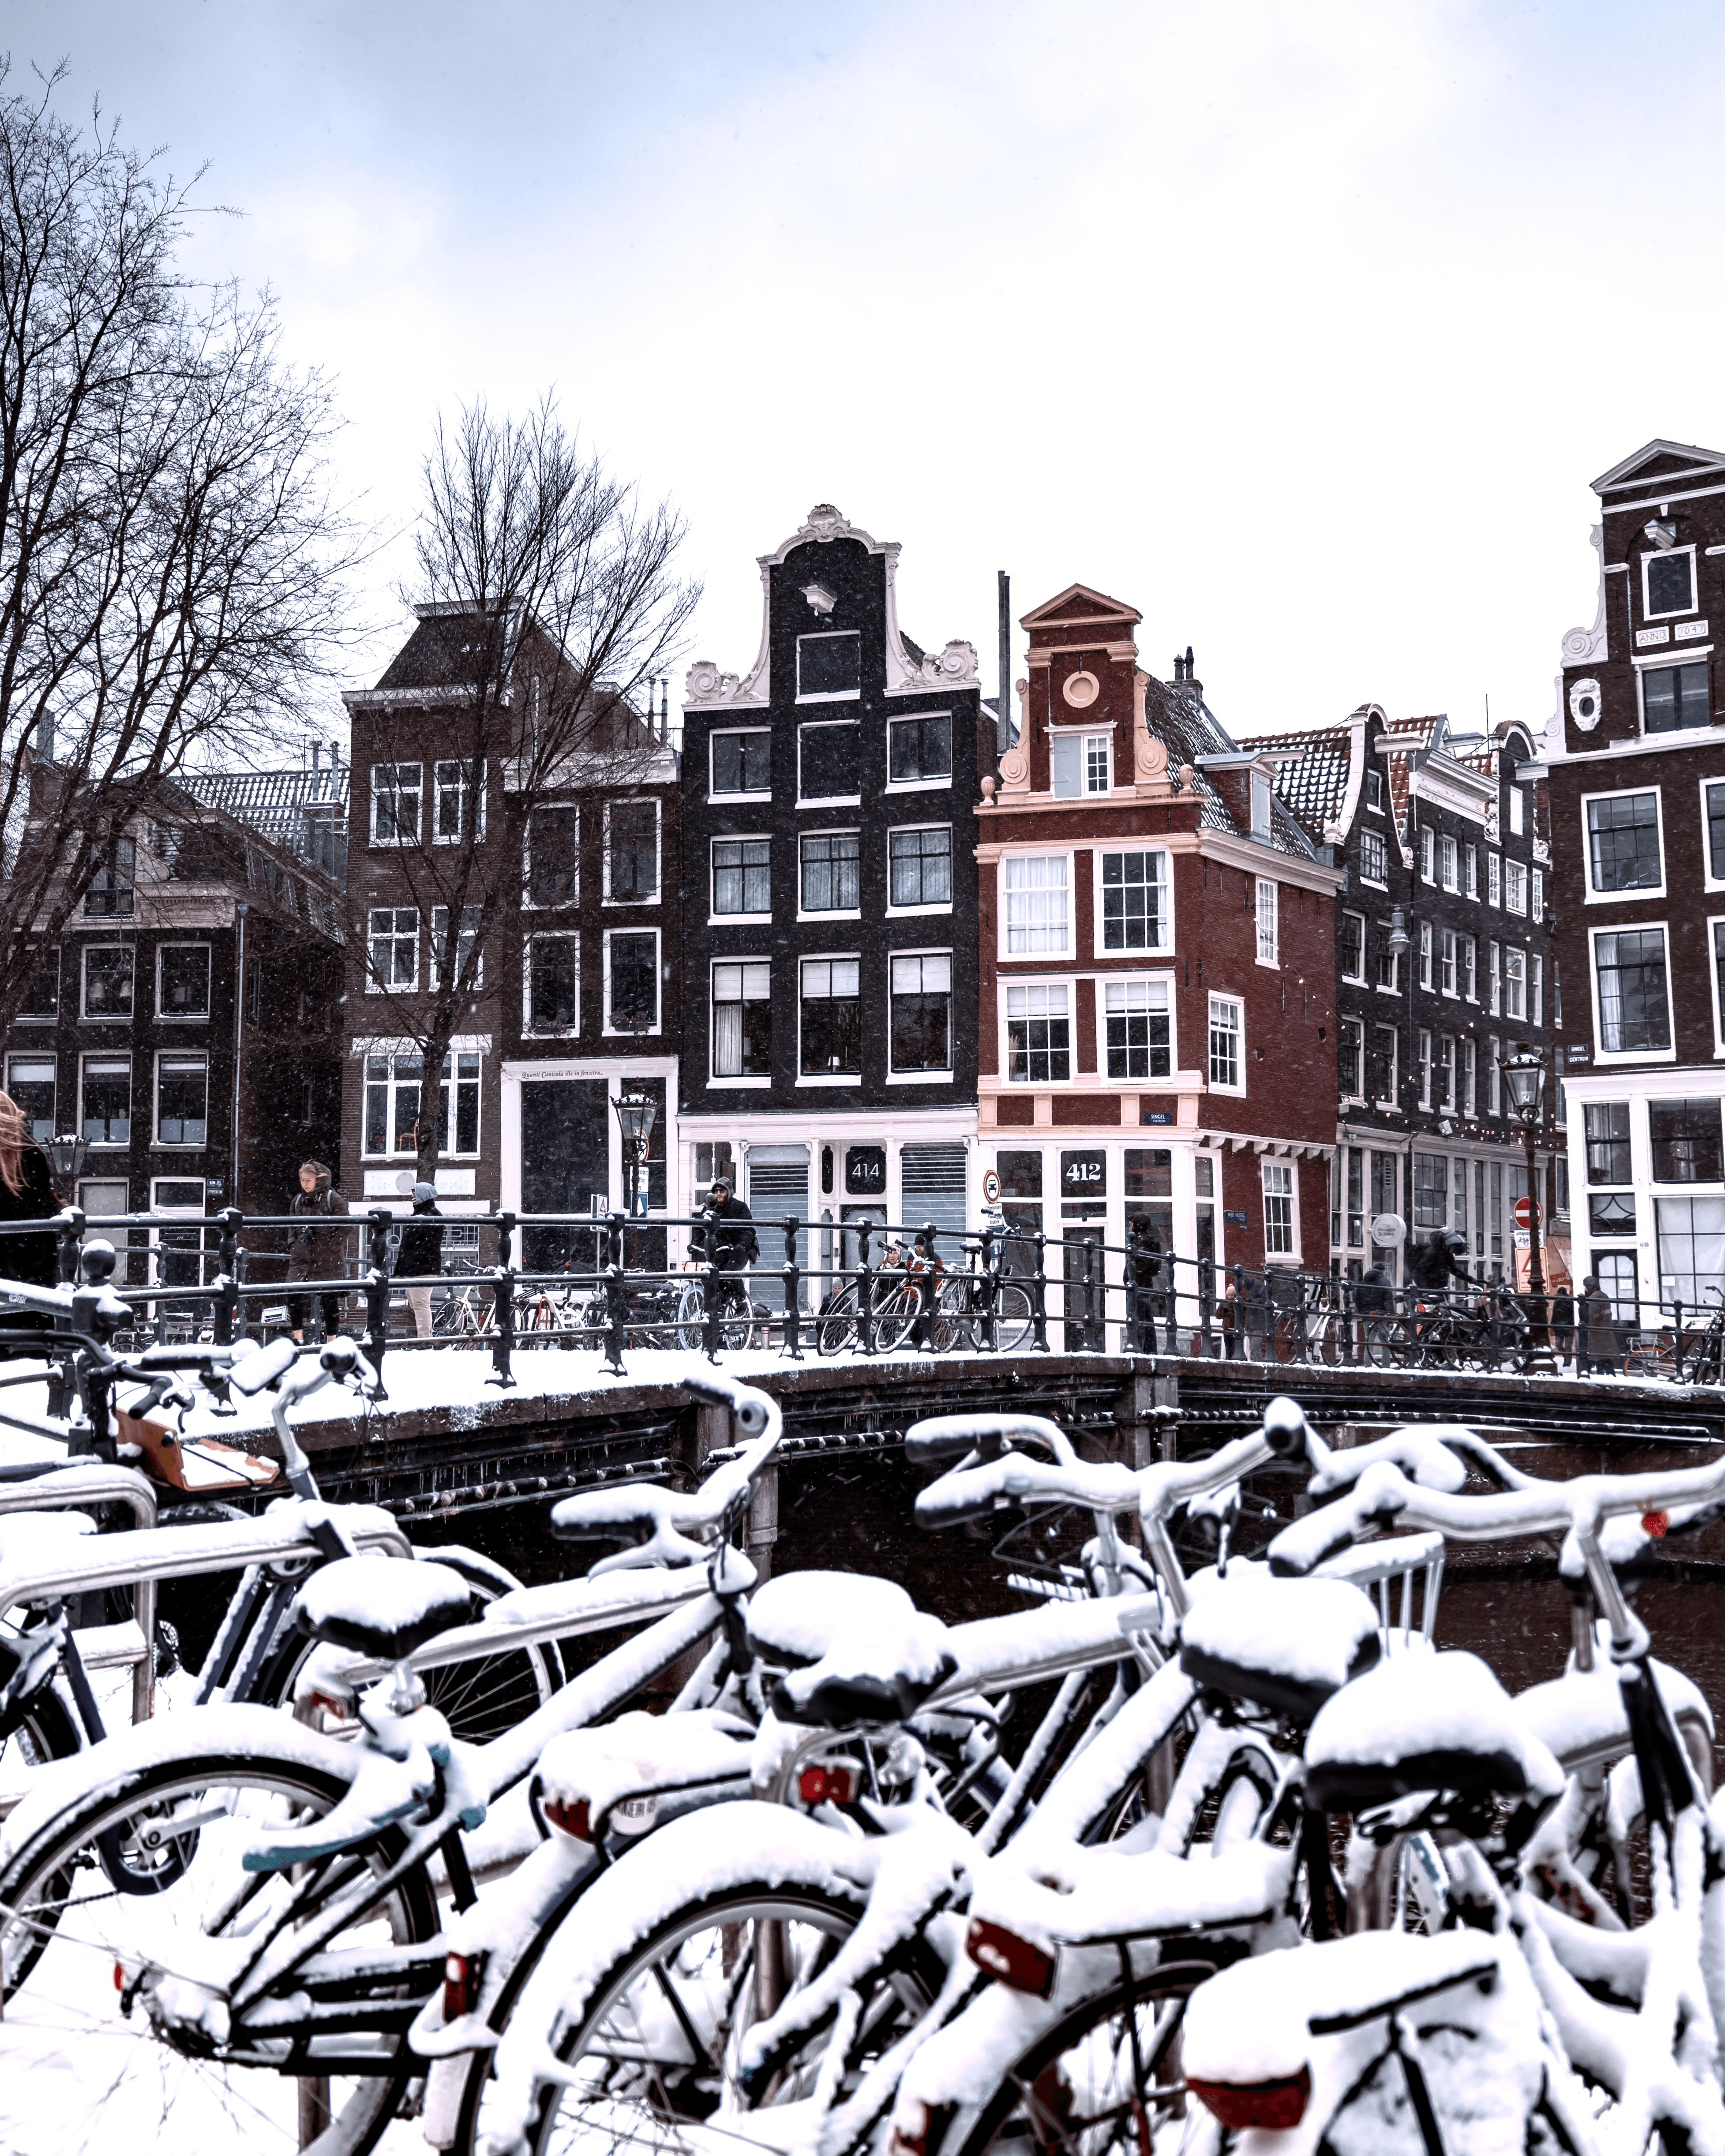 11/15 Amsterdam | Best of 2021 | Photography